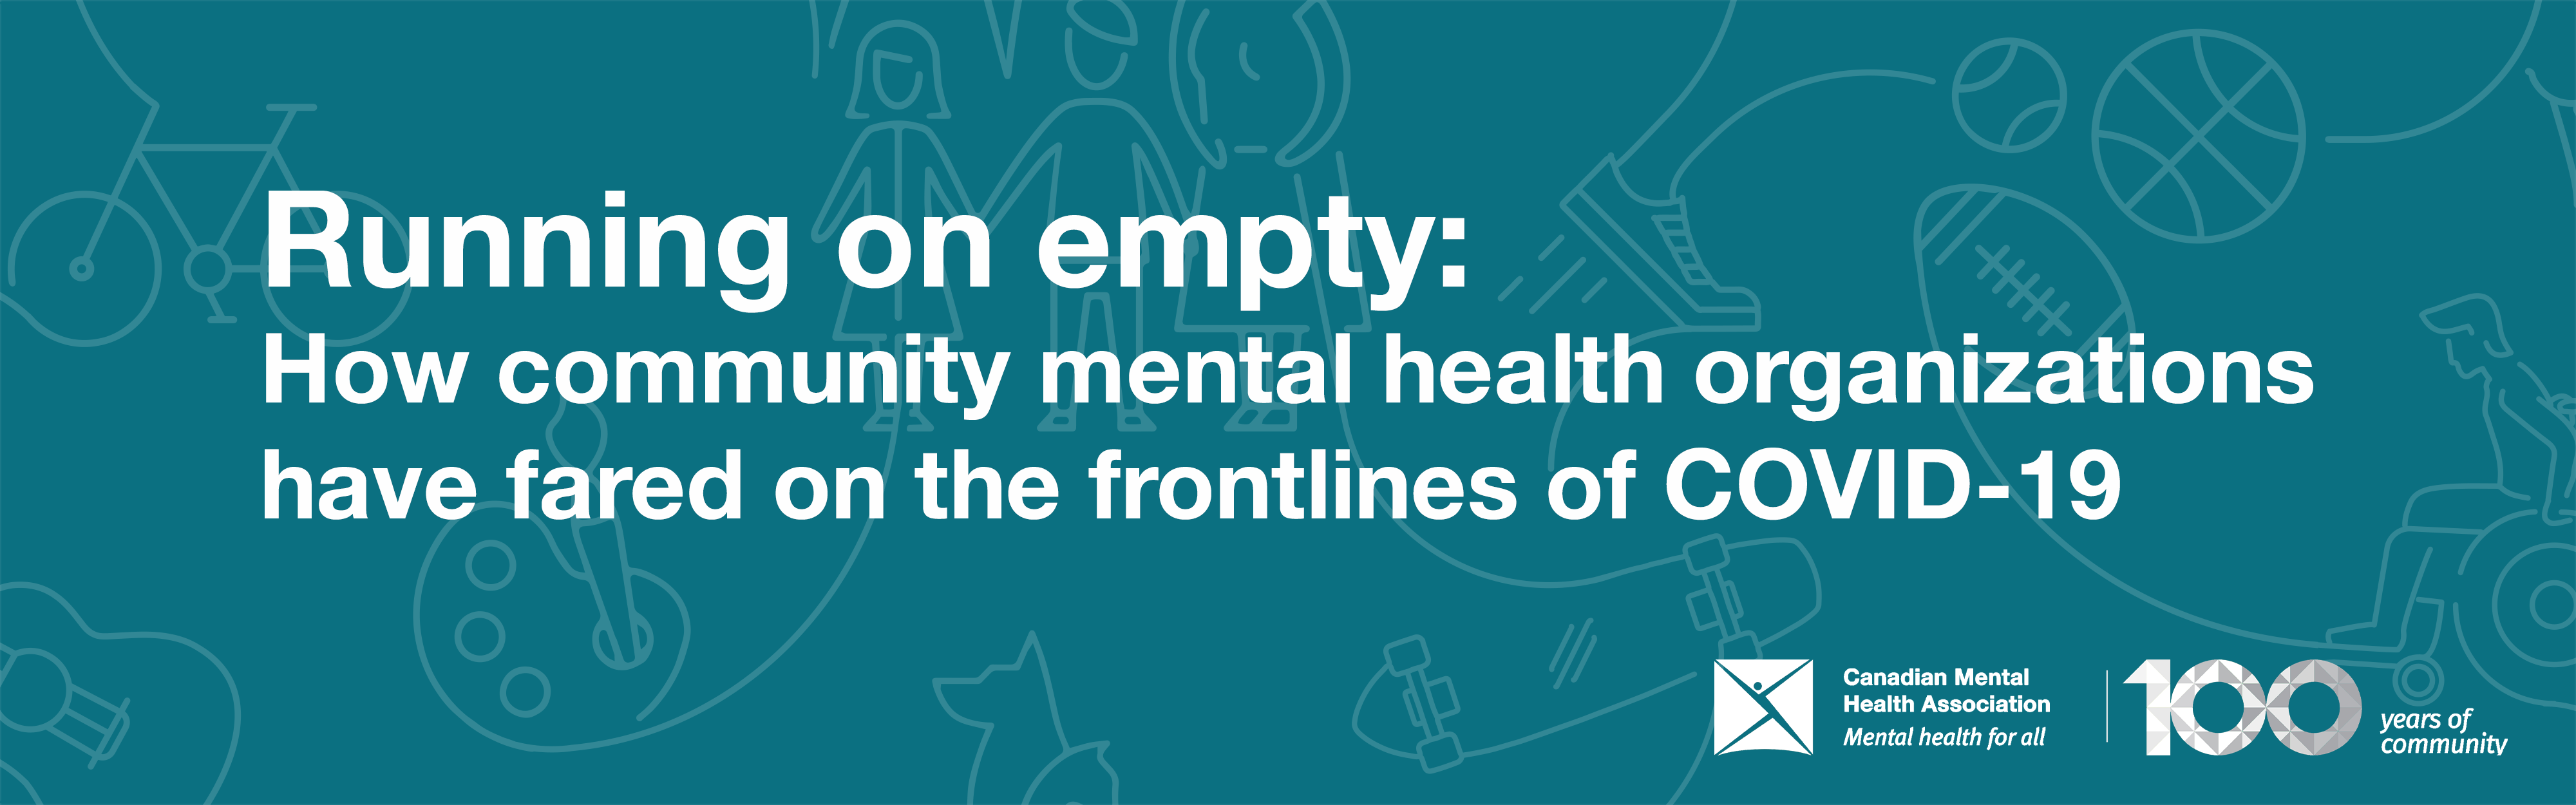 Graphic reads "Running on empty: How community mental health organizations have fared on the frontlines of COVID-19" against a teal background